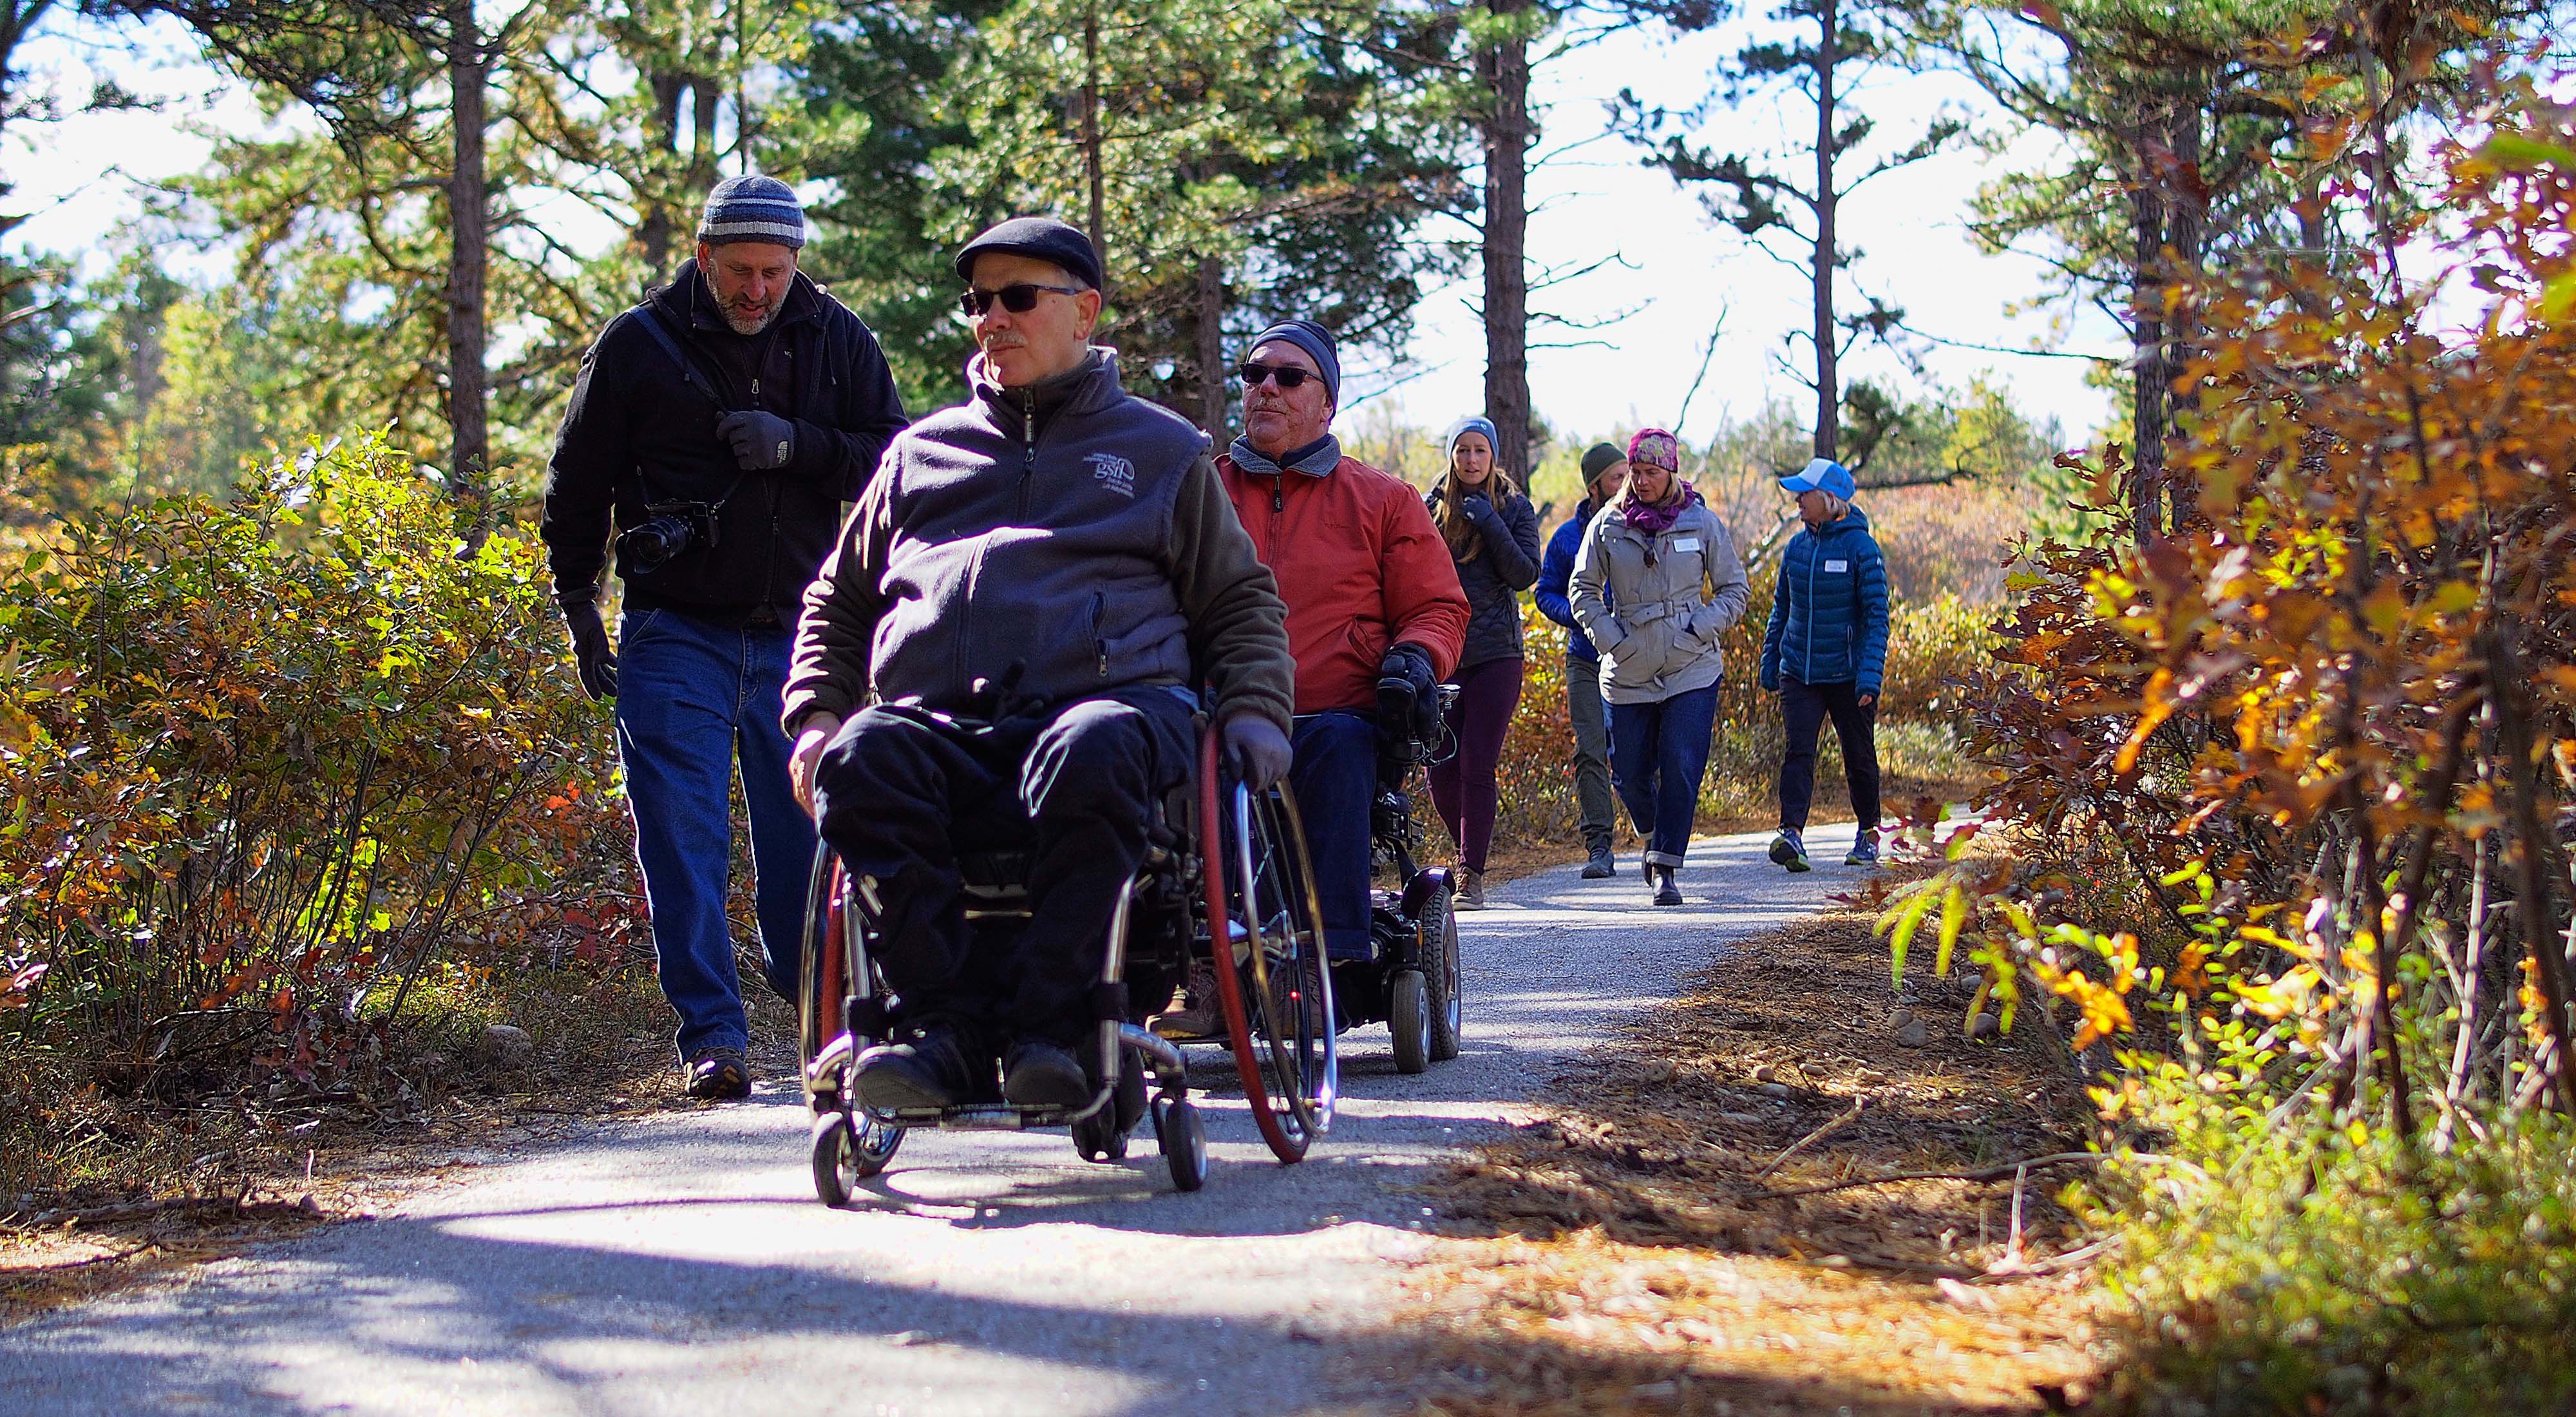 A group including a man using a wheelchair make their way down a path in the woods.